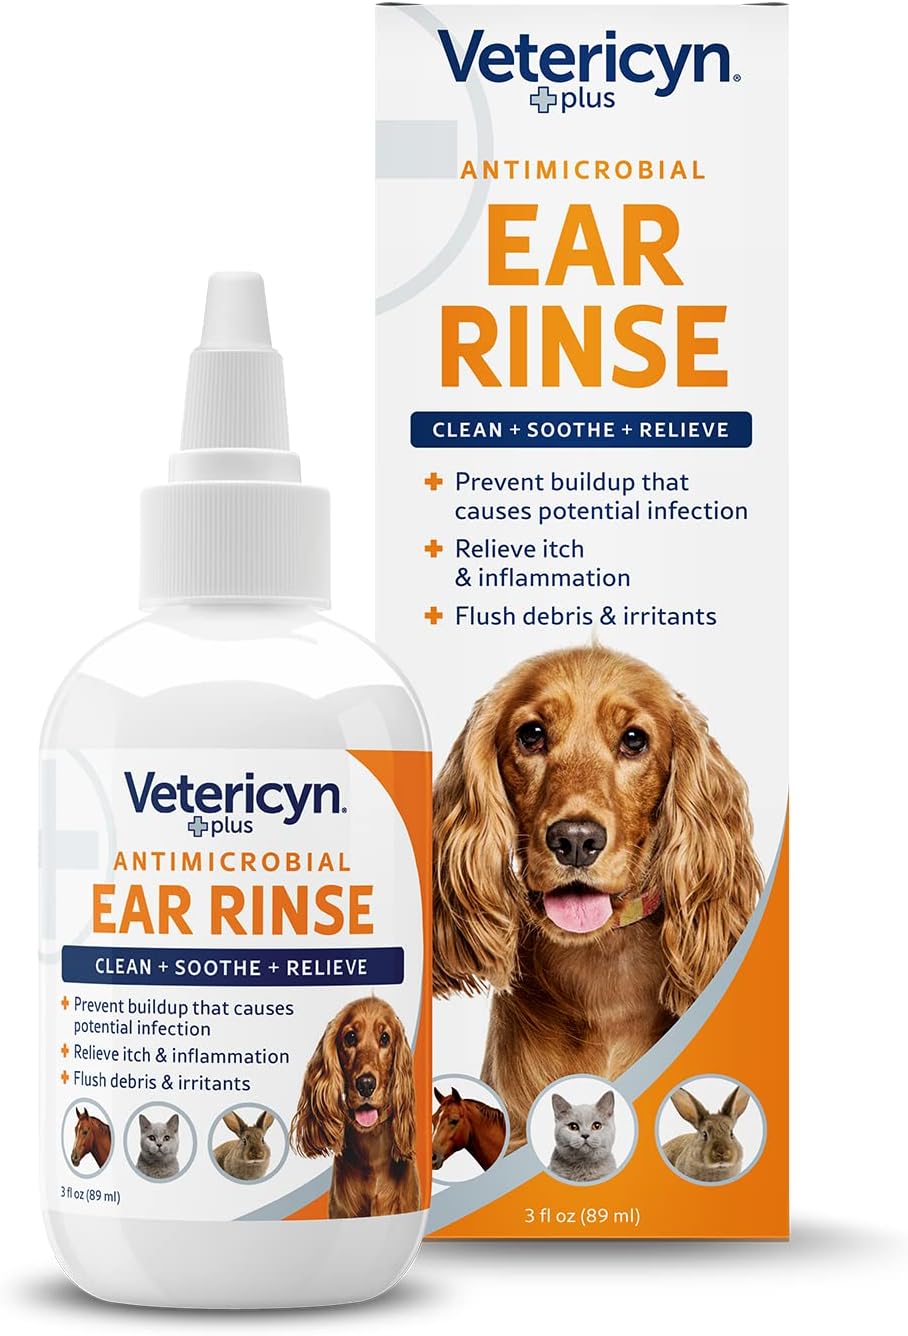 Vetericyn Plus Dog Ear Rinse | Dog Ear Cleaner to Soothe and Relieve Itchy Ears, Safe for Cat Ears, Rabbit Ears, and All Animal's Ear Problems. 3 ounces